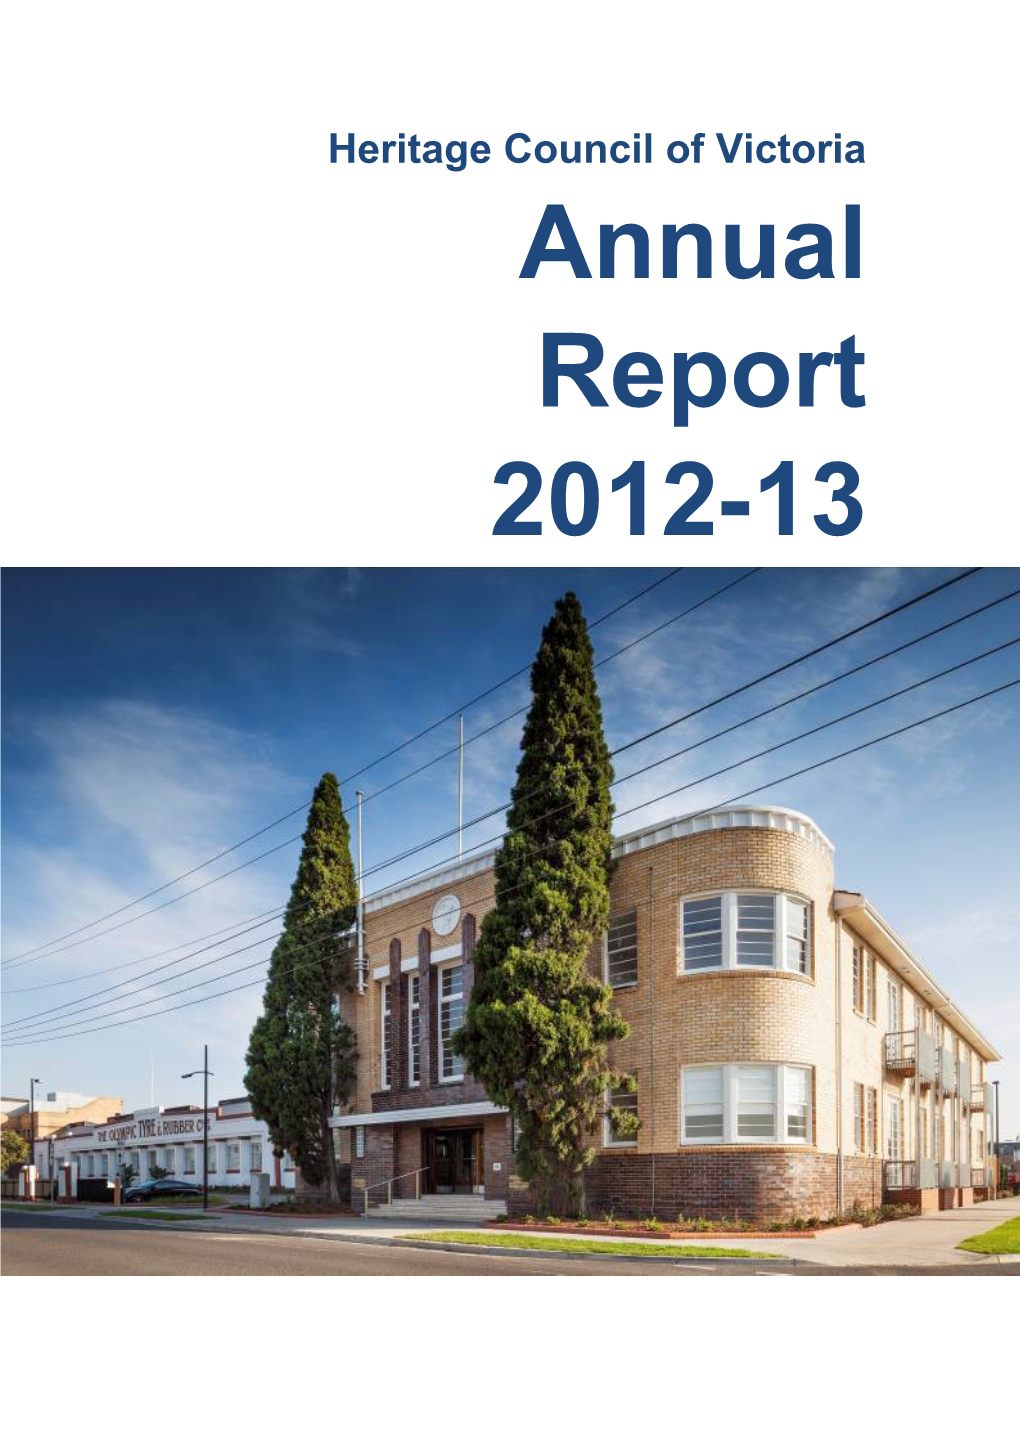 Heritage Council Annual Report 2012-13 Rev